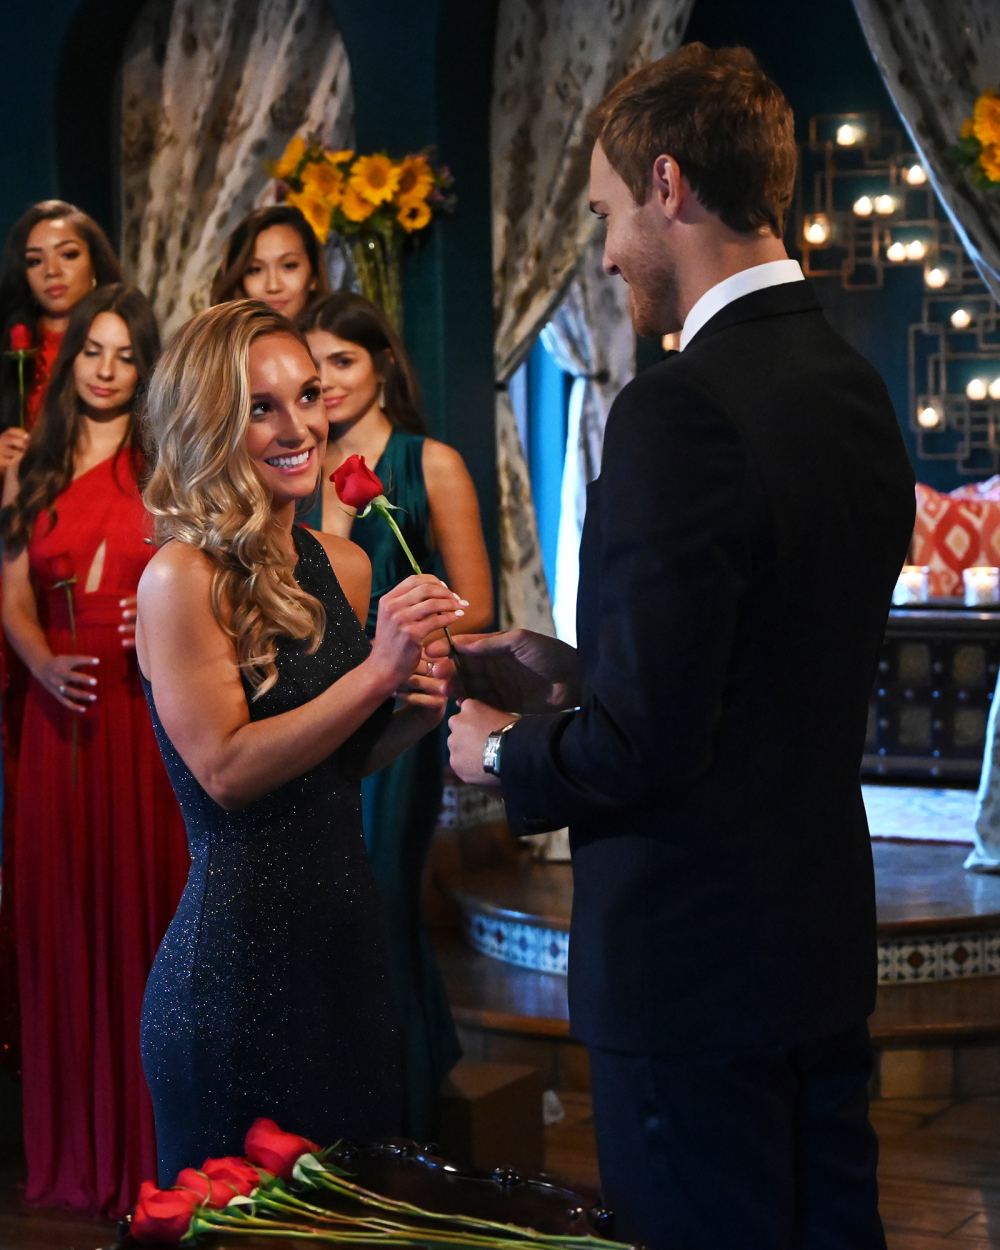 5 Things to Know About Eliminated Fan Favorite ‘Bachelor’ Contestant Sarah Coffin